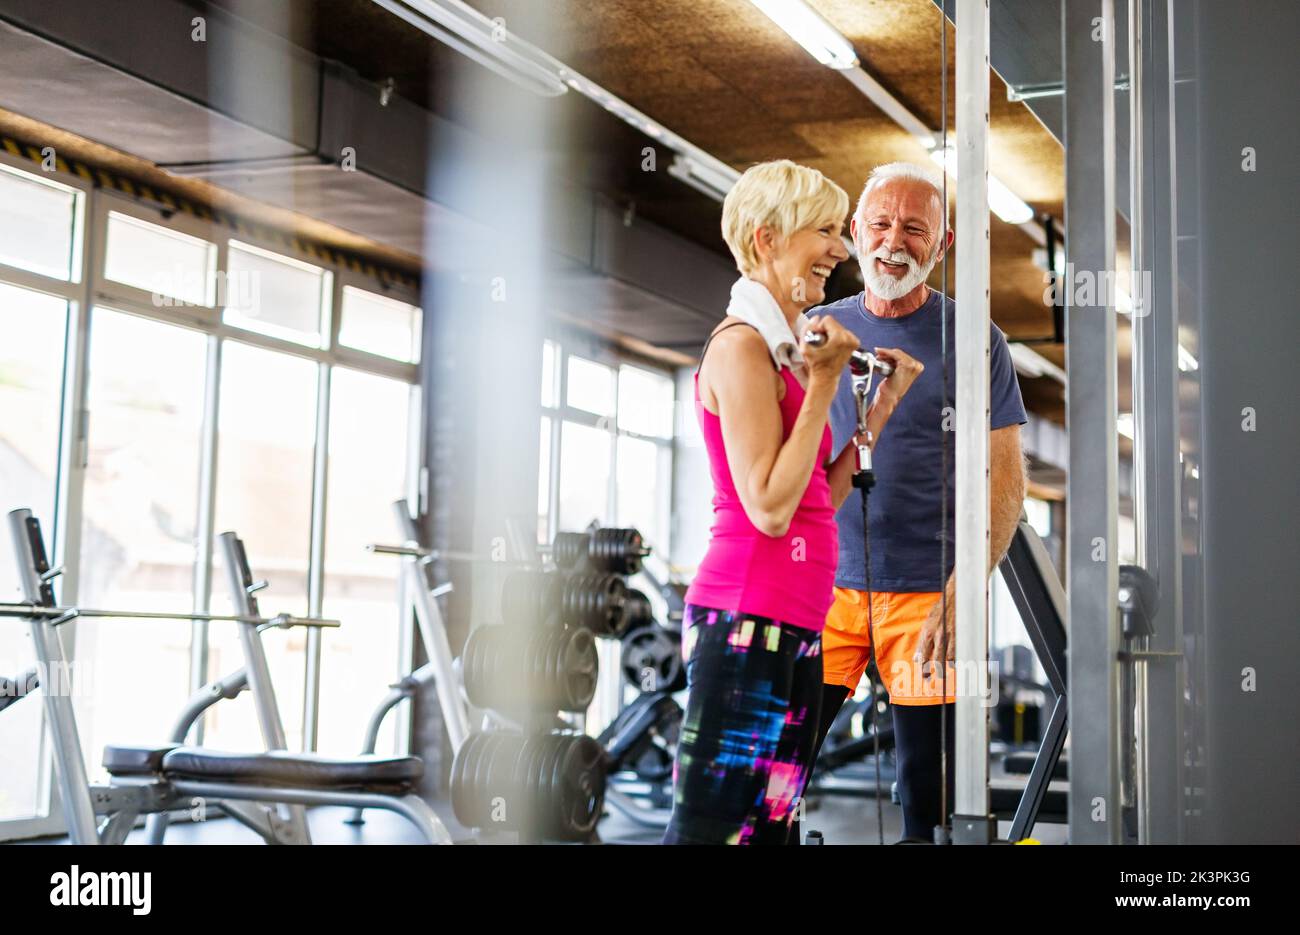 Senior fit man and woman doing exercises in gym to stay healthy Stock Photo